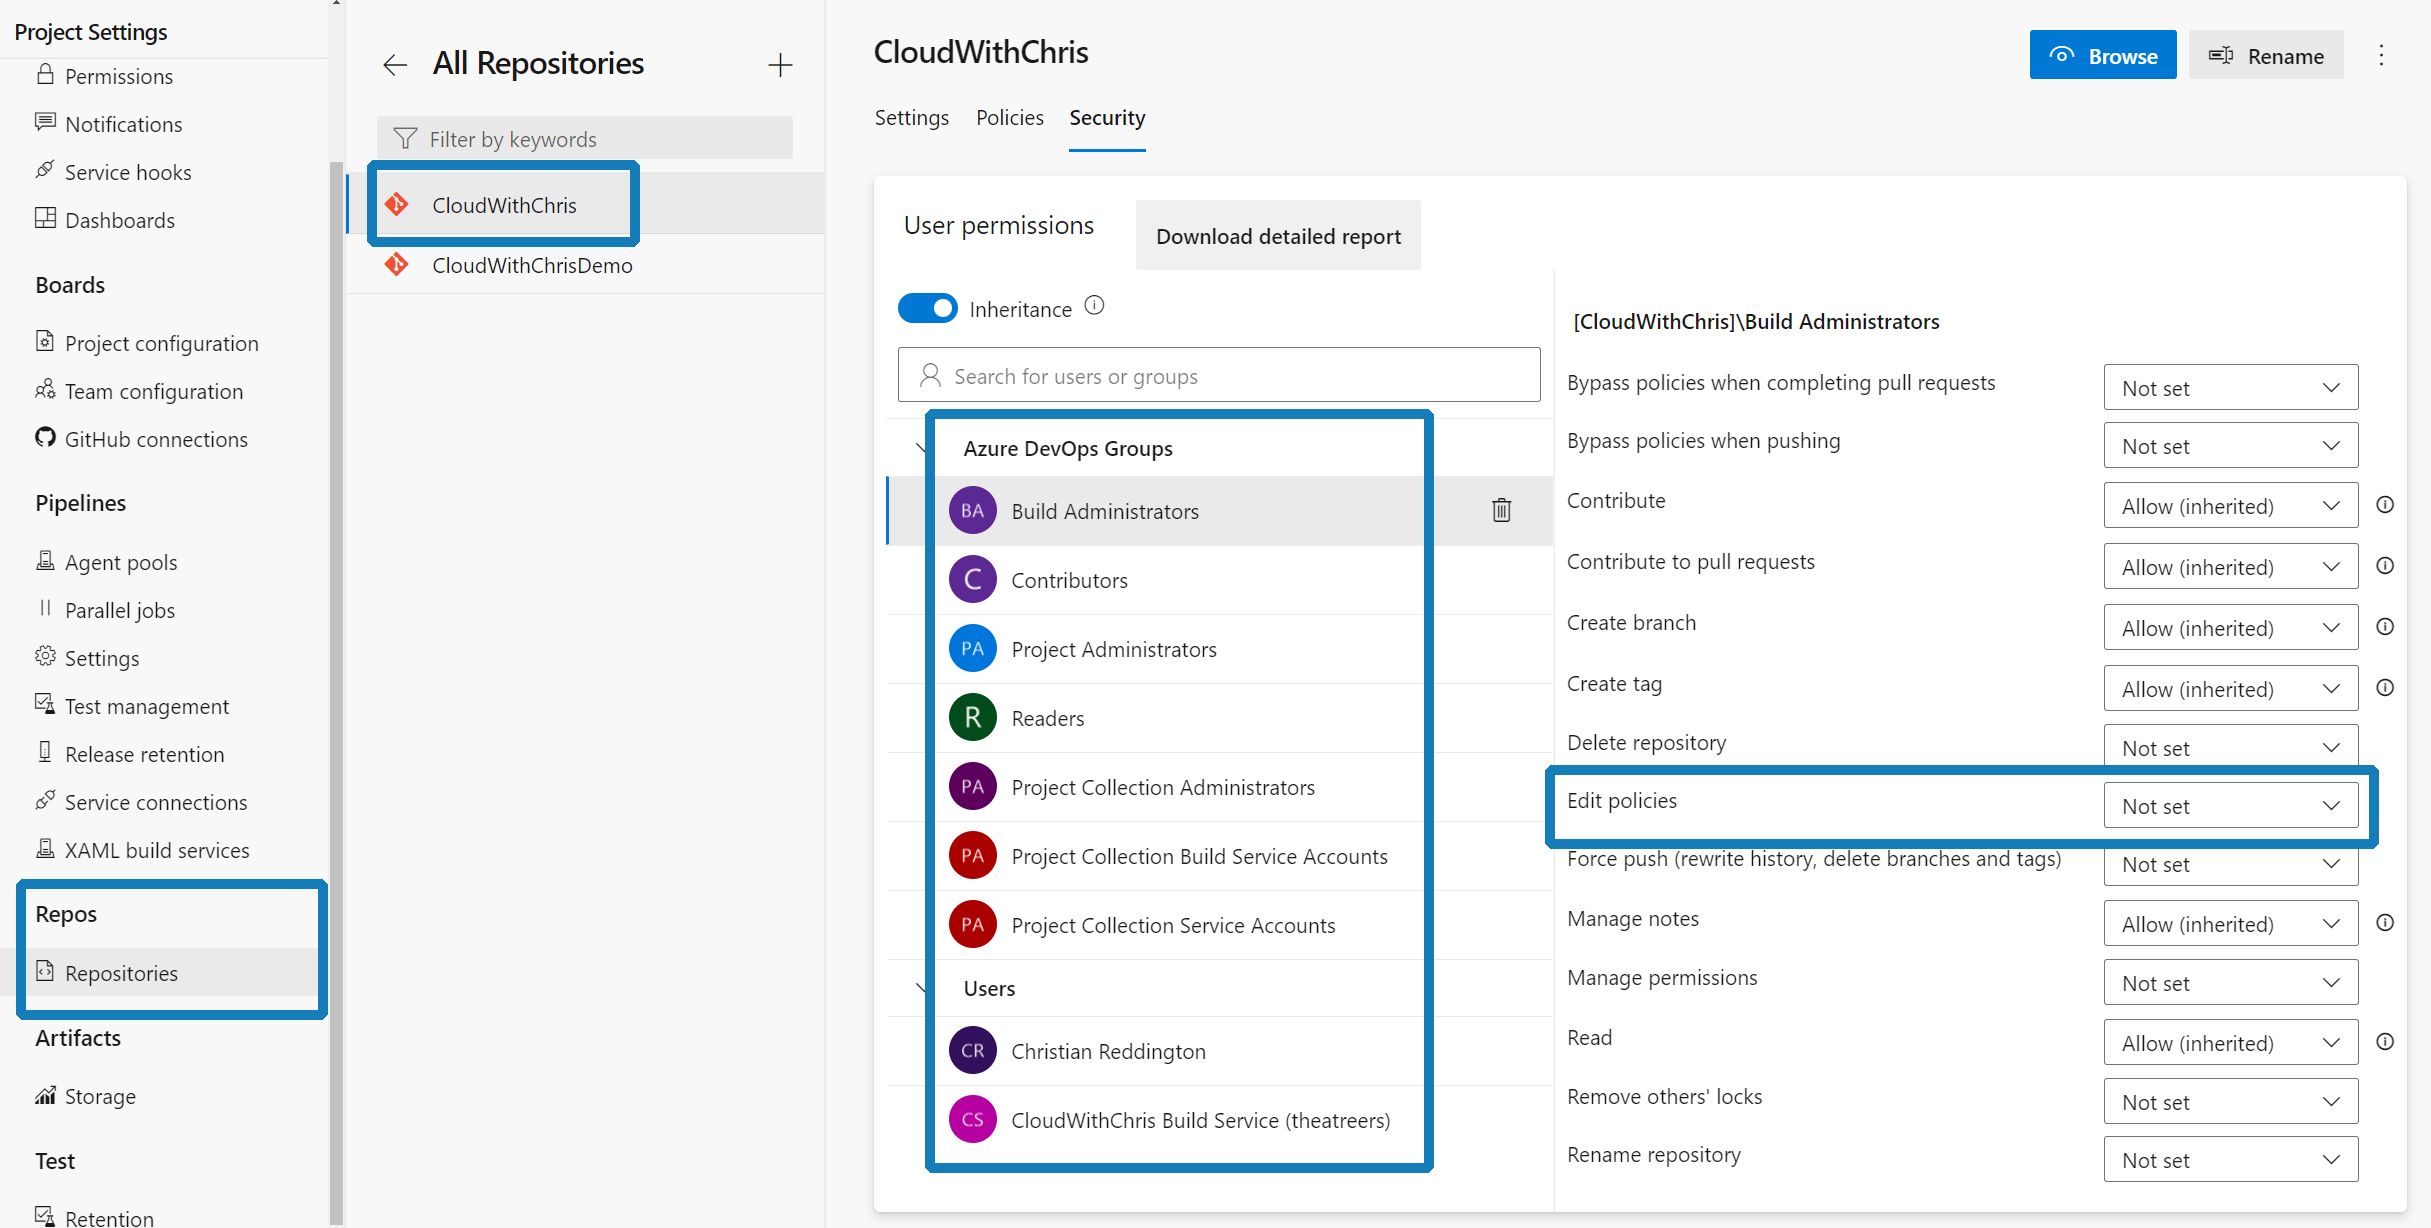 Screenshot showing the user interface to update permissions for Azure DevOps Groups within a repository